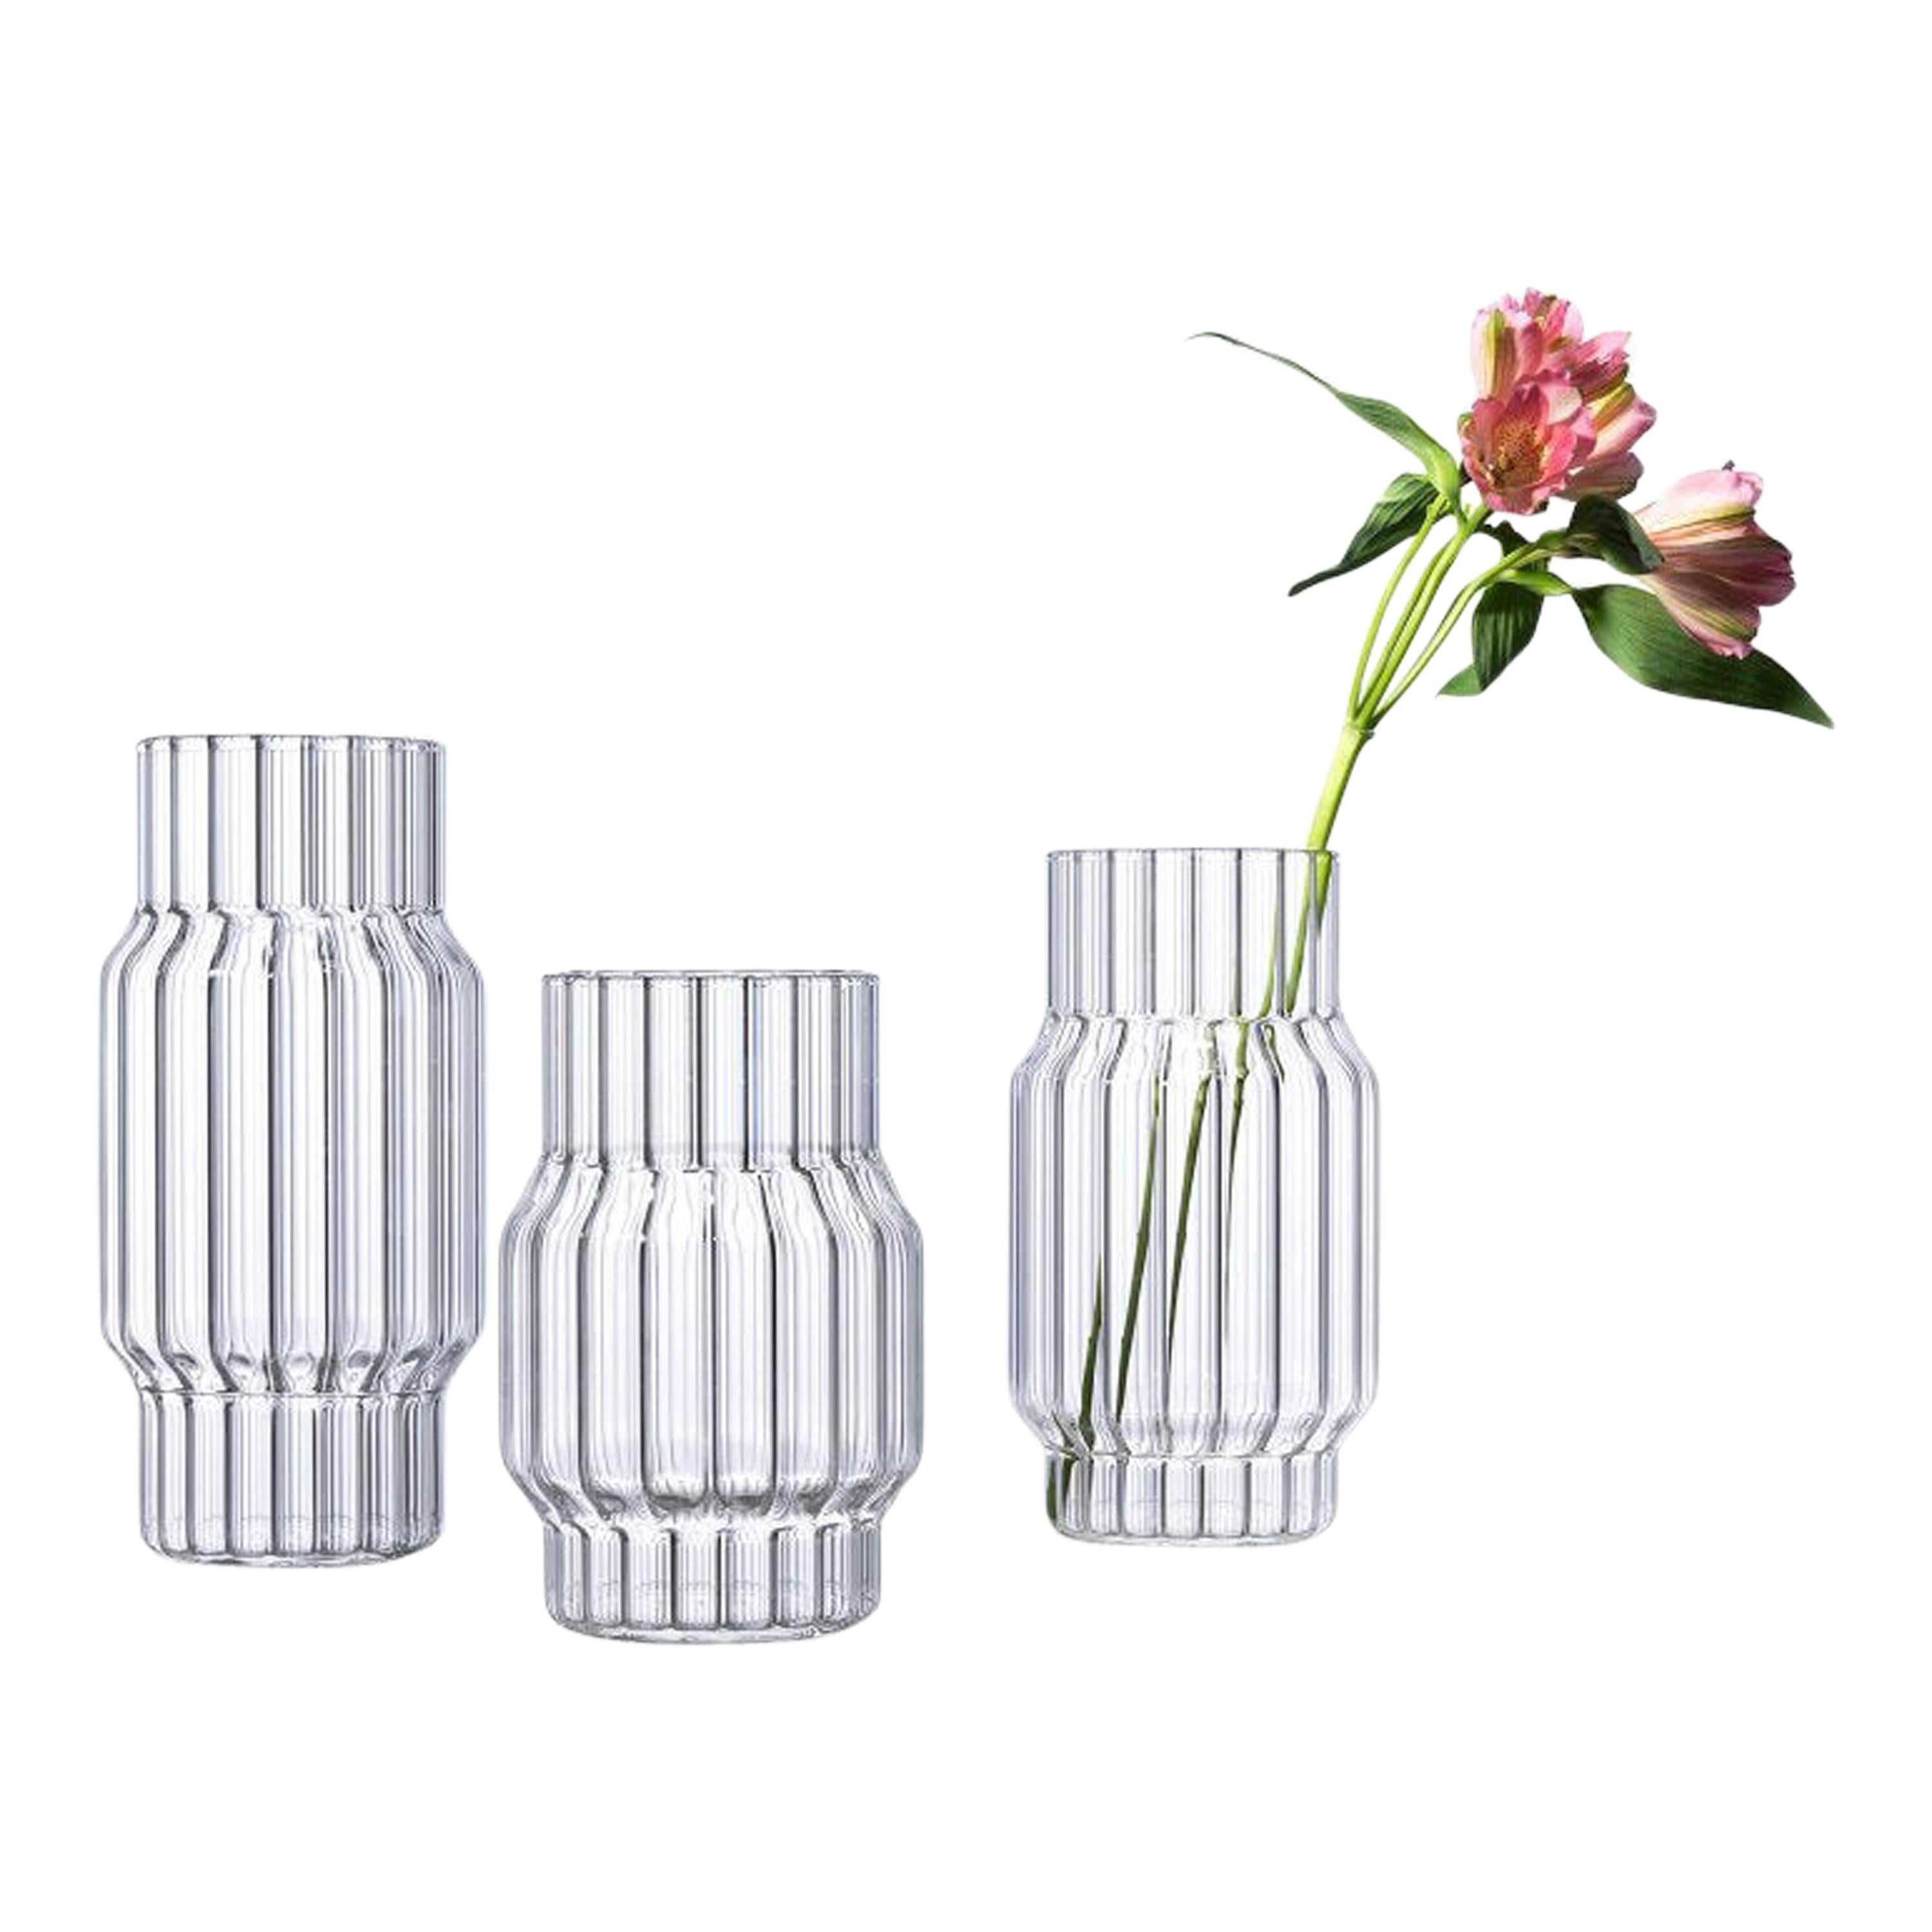 Contemporary Glass Fluted Albany Vase Set, 3 Vases, in Stock in EU